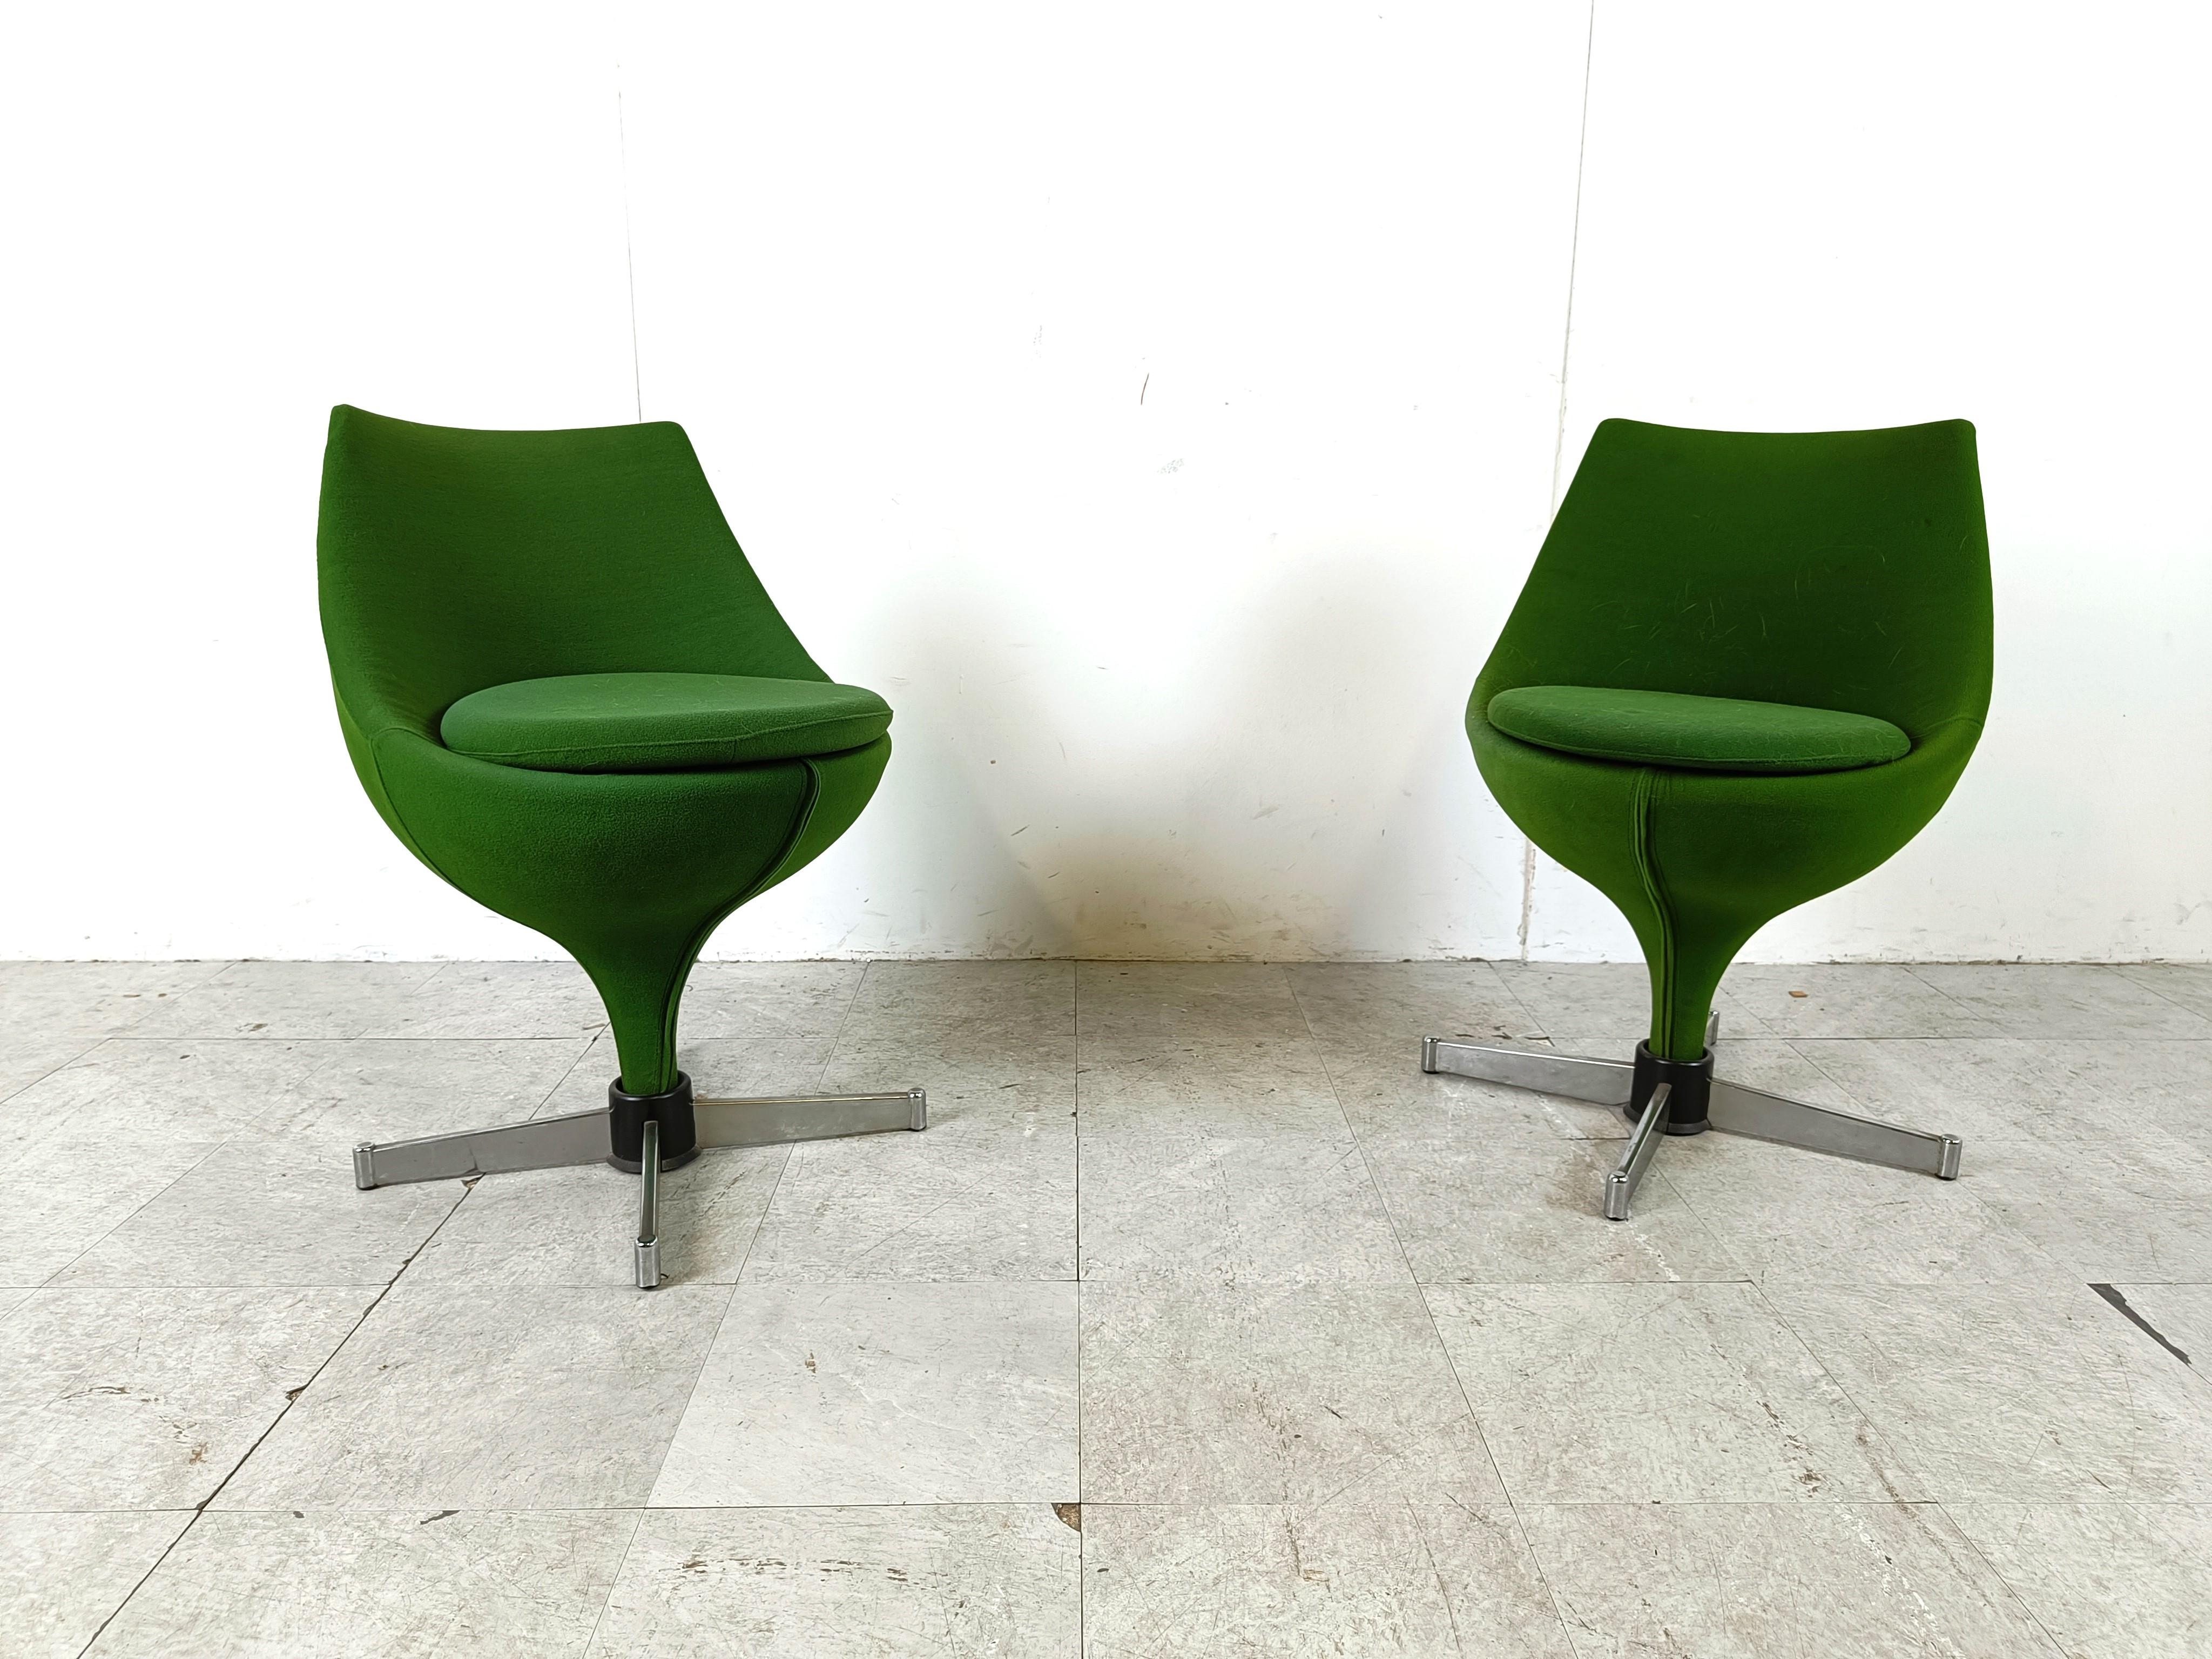 French Pair of polaris chairs by Pierre Guariche for Meurop, 1960s